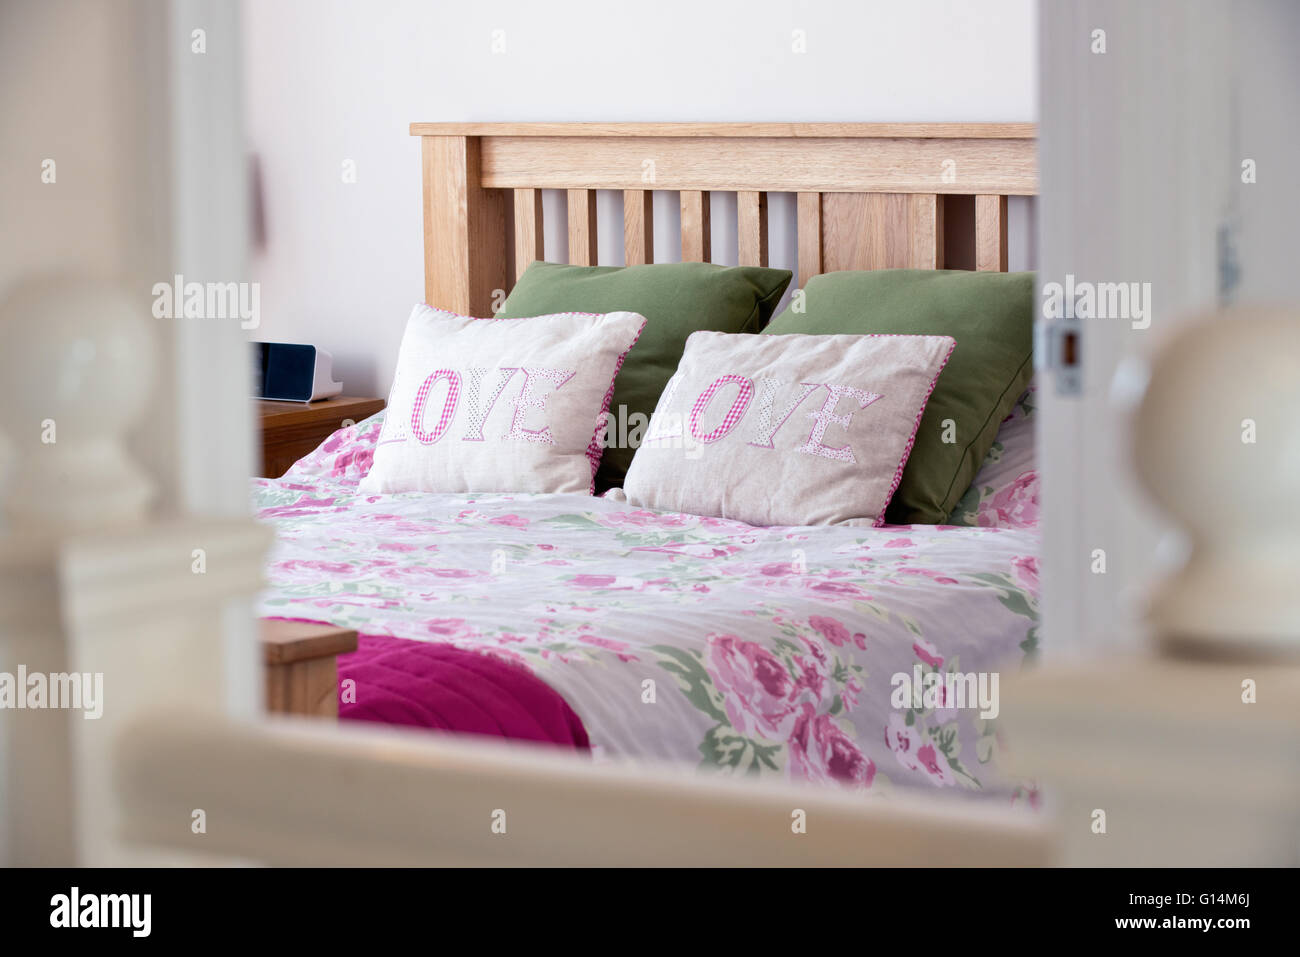 A lifestyle image of a dressed bed in a family home, with pillows emblazoned with the word love on them Stock Photo